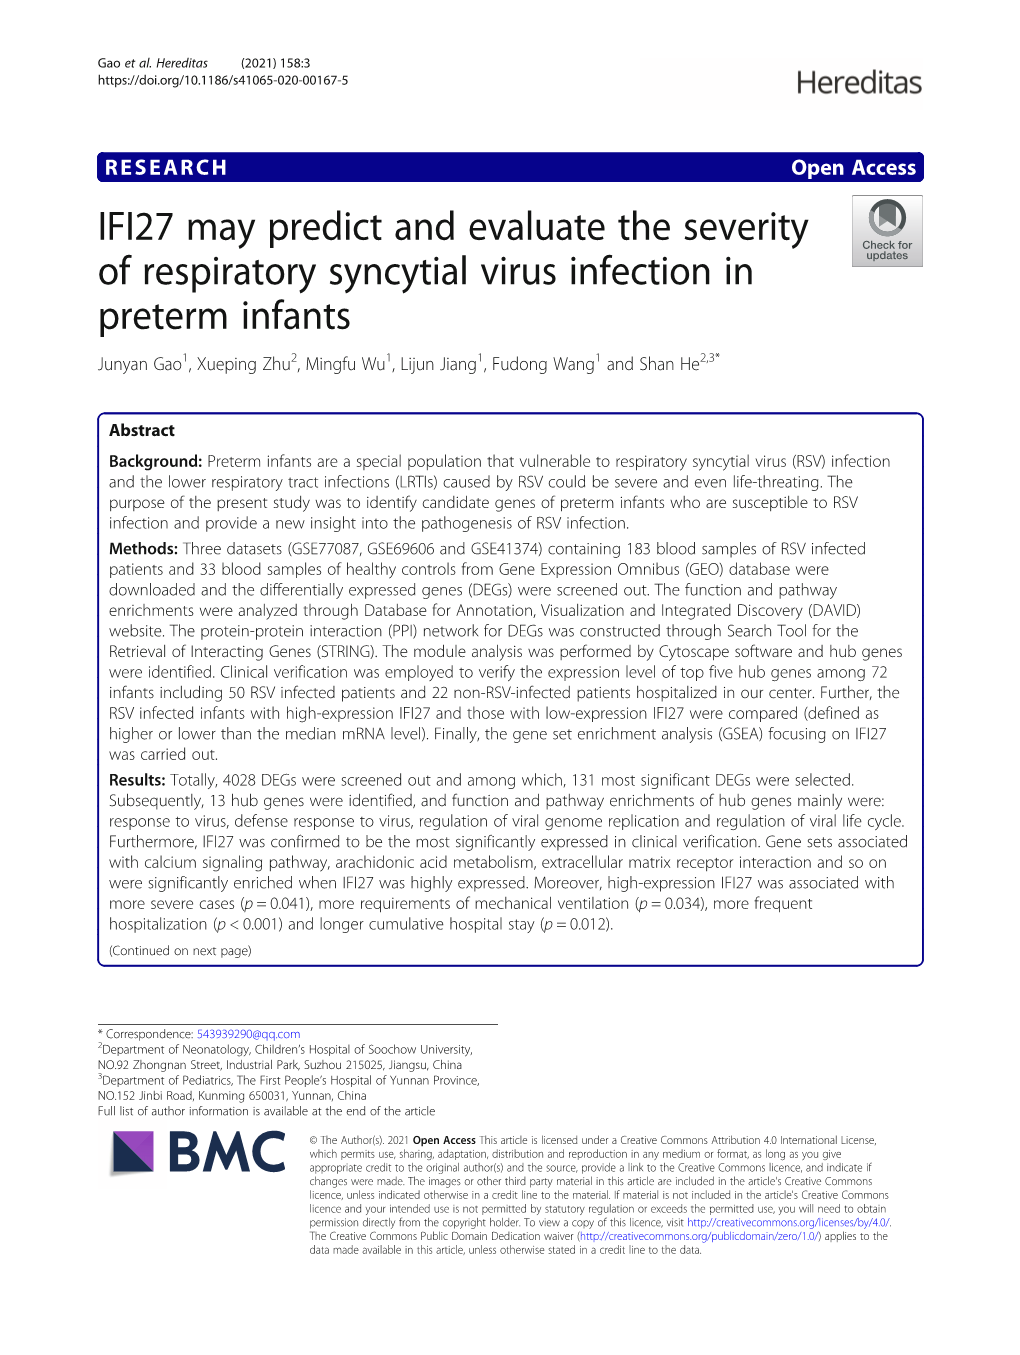 IFI27 May Predict and Evaluate the Severity of Respiratory Syncytial Virus